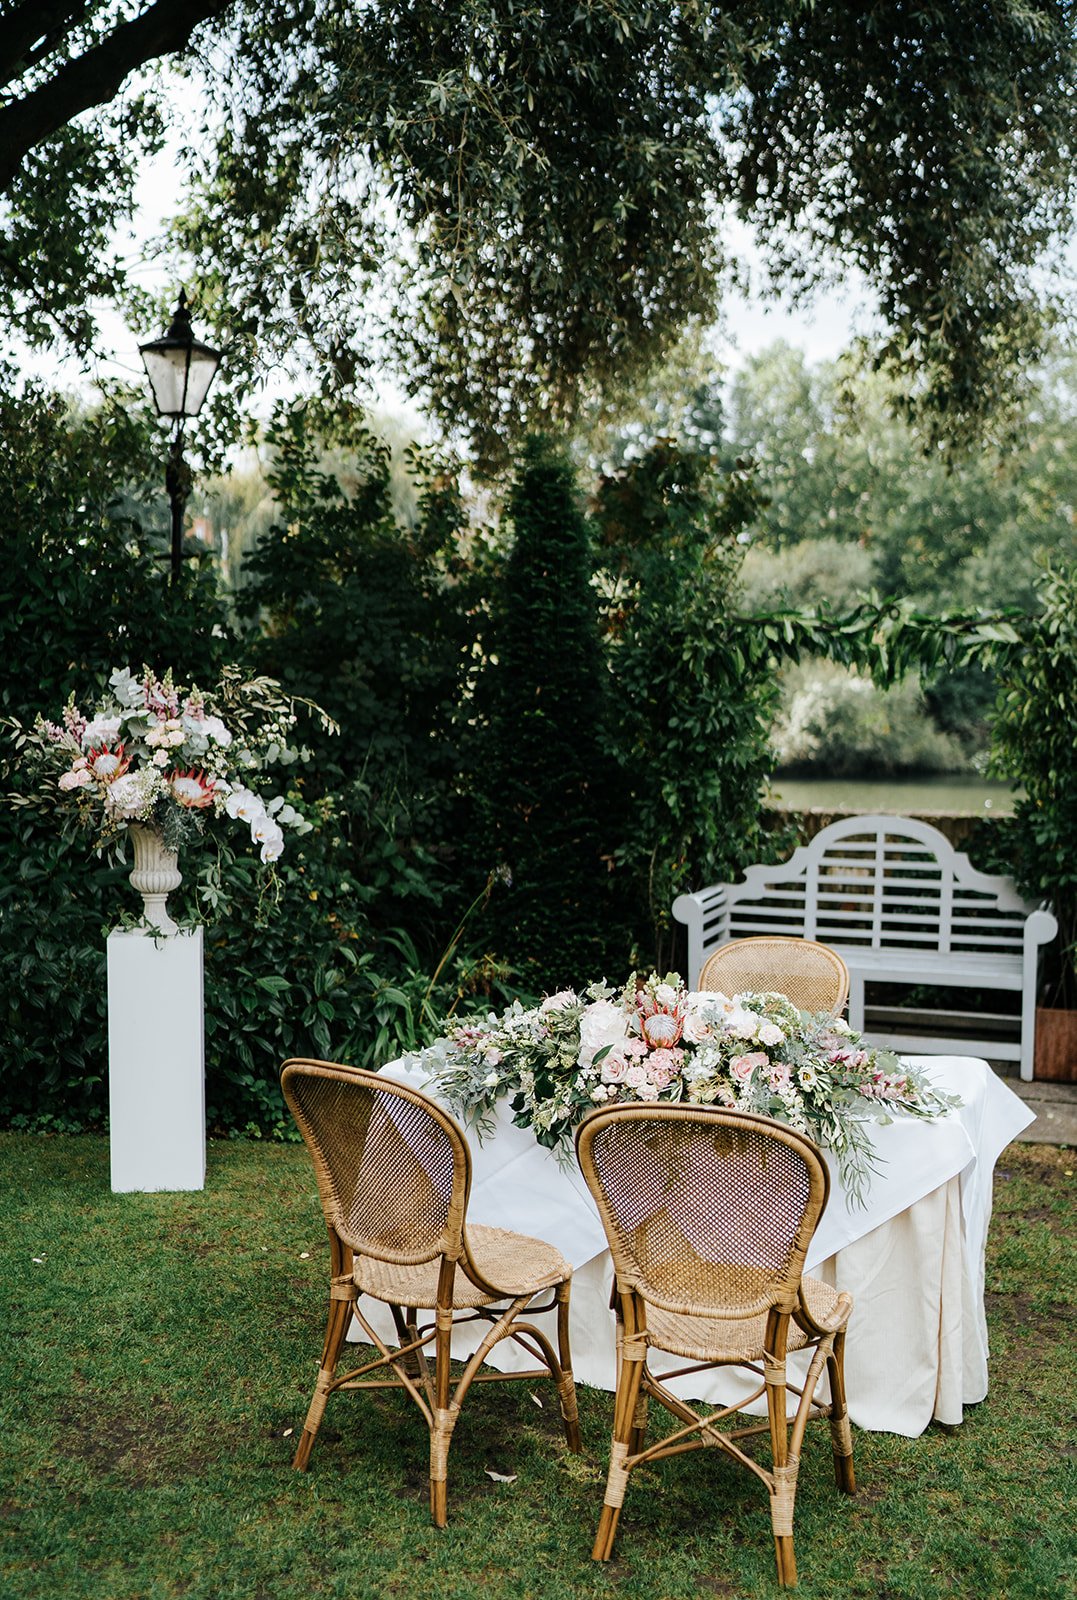 Gorgeous outdoor wedding setup at Bingham Riverhouse with rattan chairs and flowers in vase